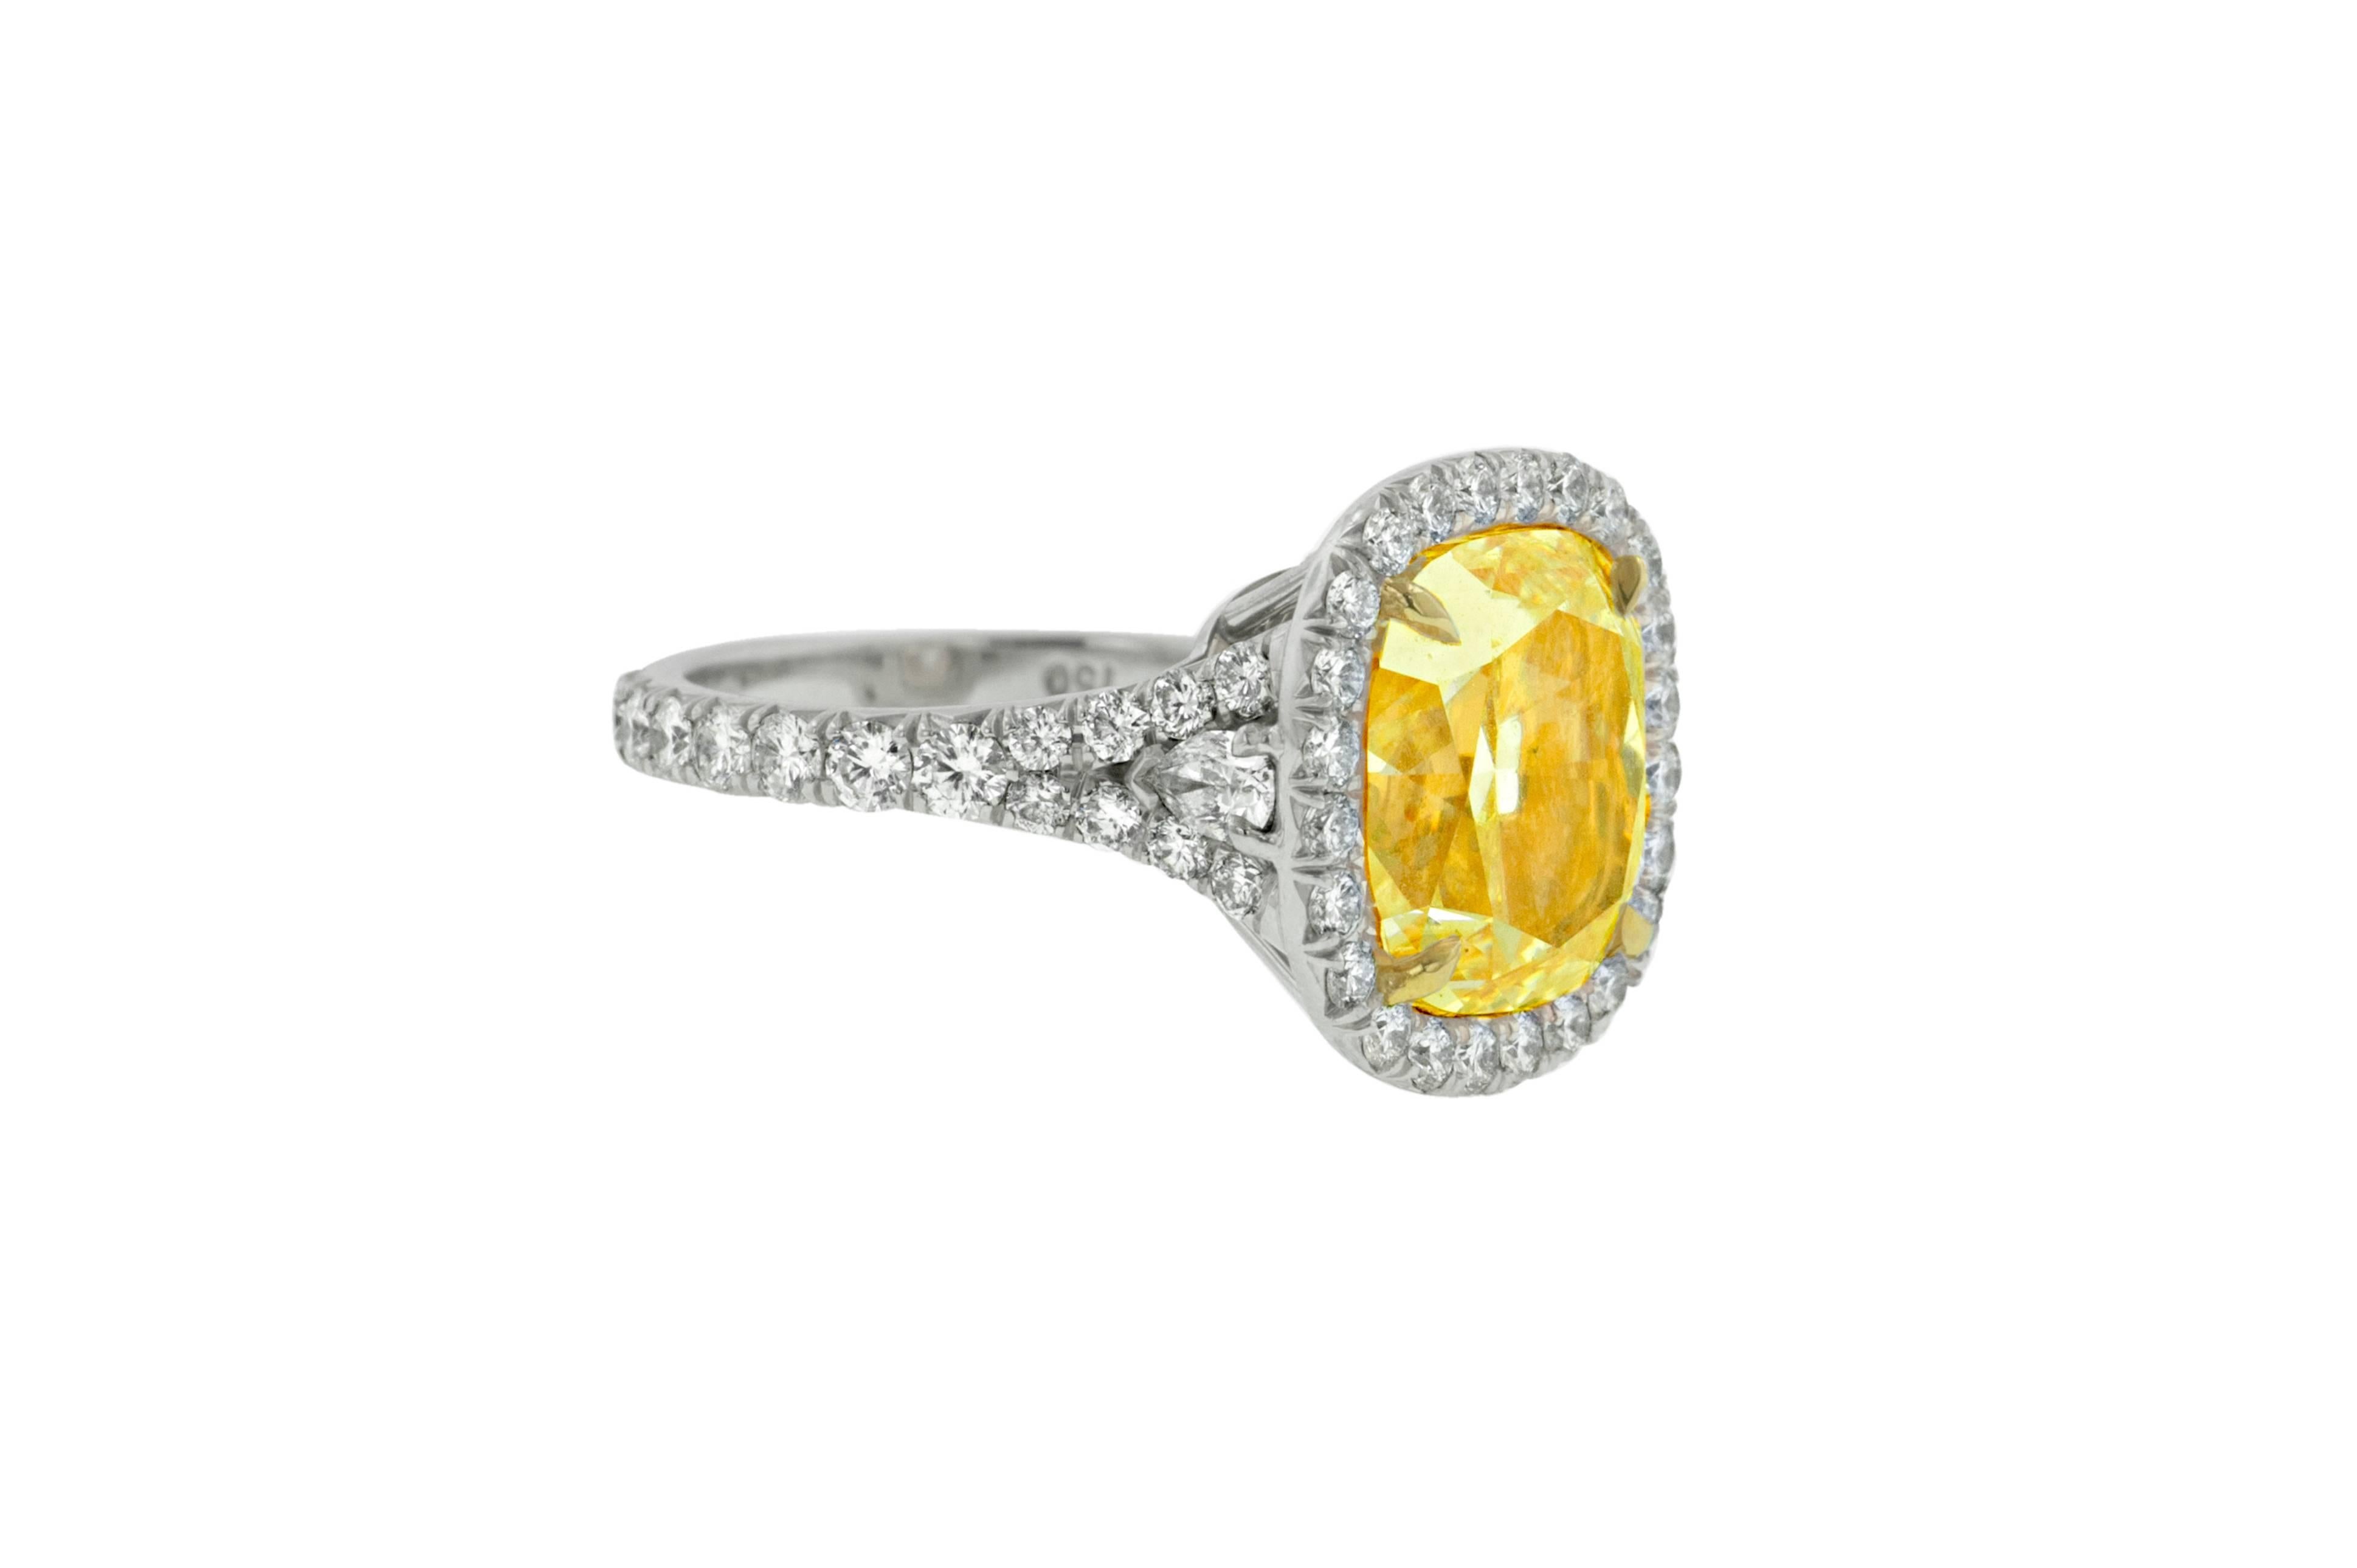 Platinum and 18 Karat Yellow Gold Fancy Yellow Diamond Ring, The center stone is 7.65 Carats Fancy Yellow in Color, VS2 in Clarity cushion cut diamonds, surrounded by 1.60 Carats of white diamonds around. 

